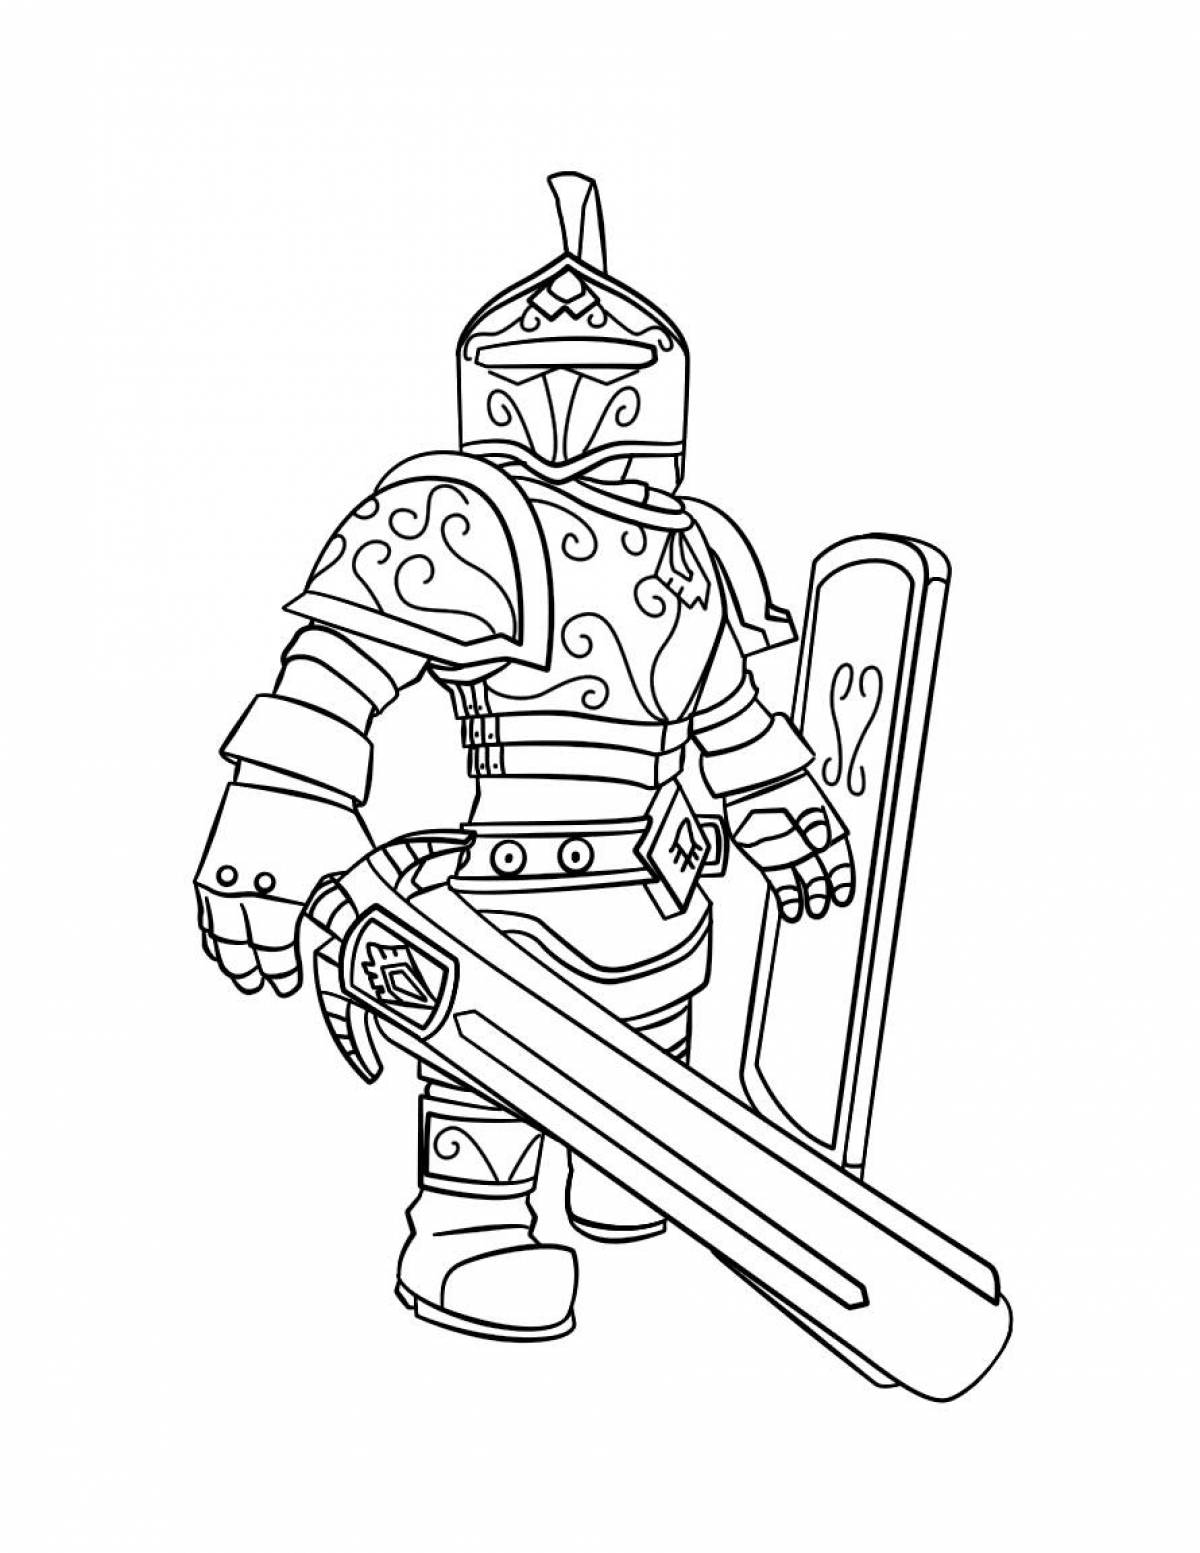 Roblox amazing door coloring pages